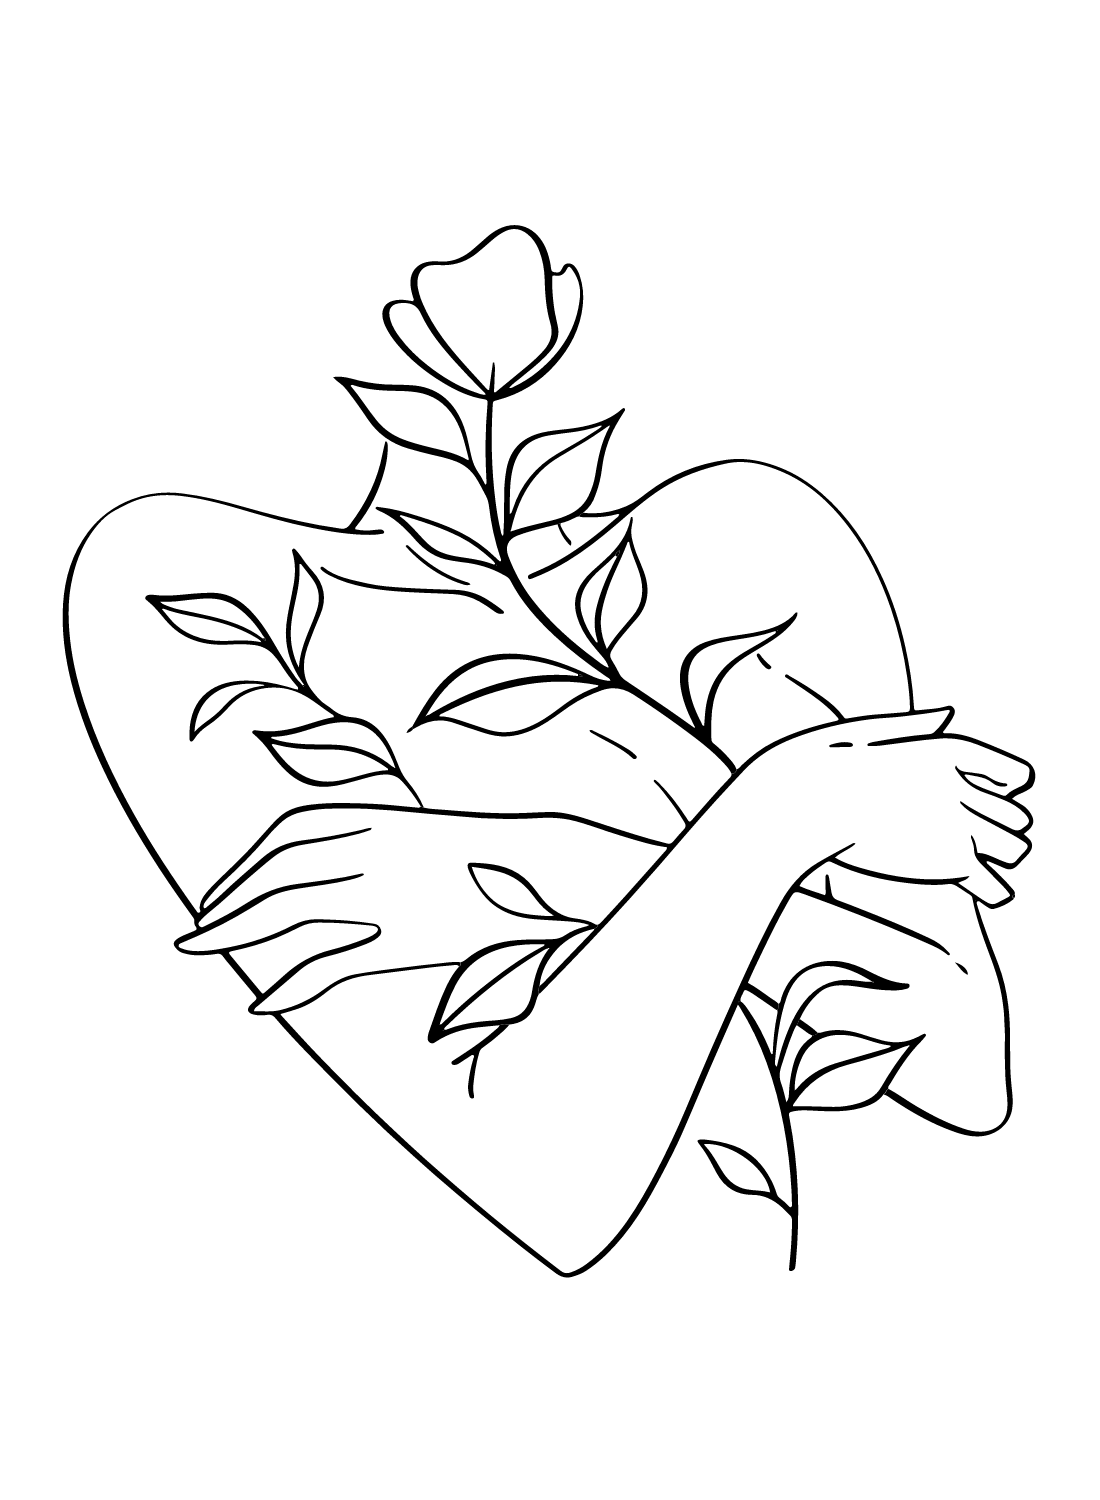 Drawing Mental Health Coloring Page